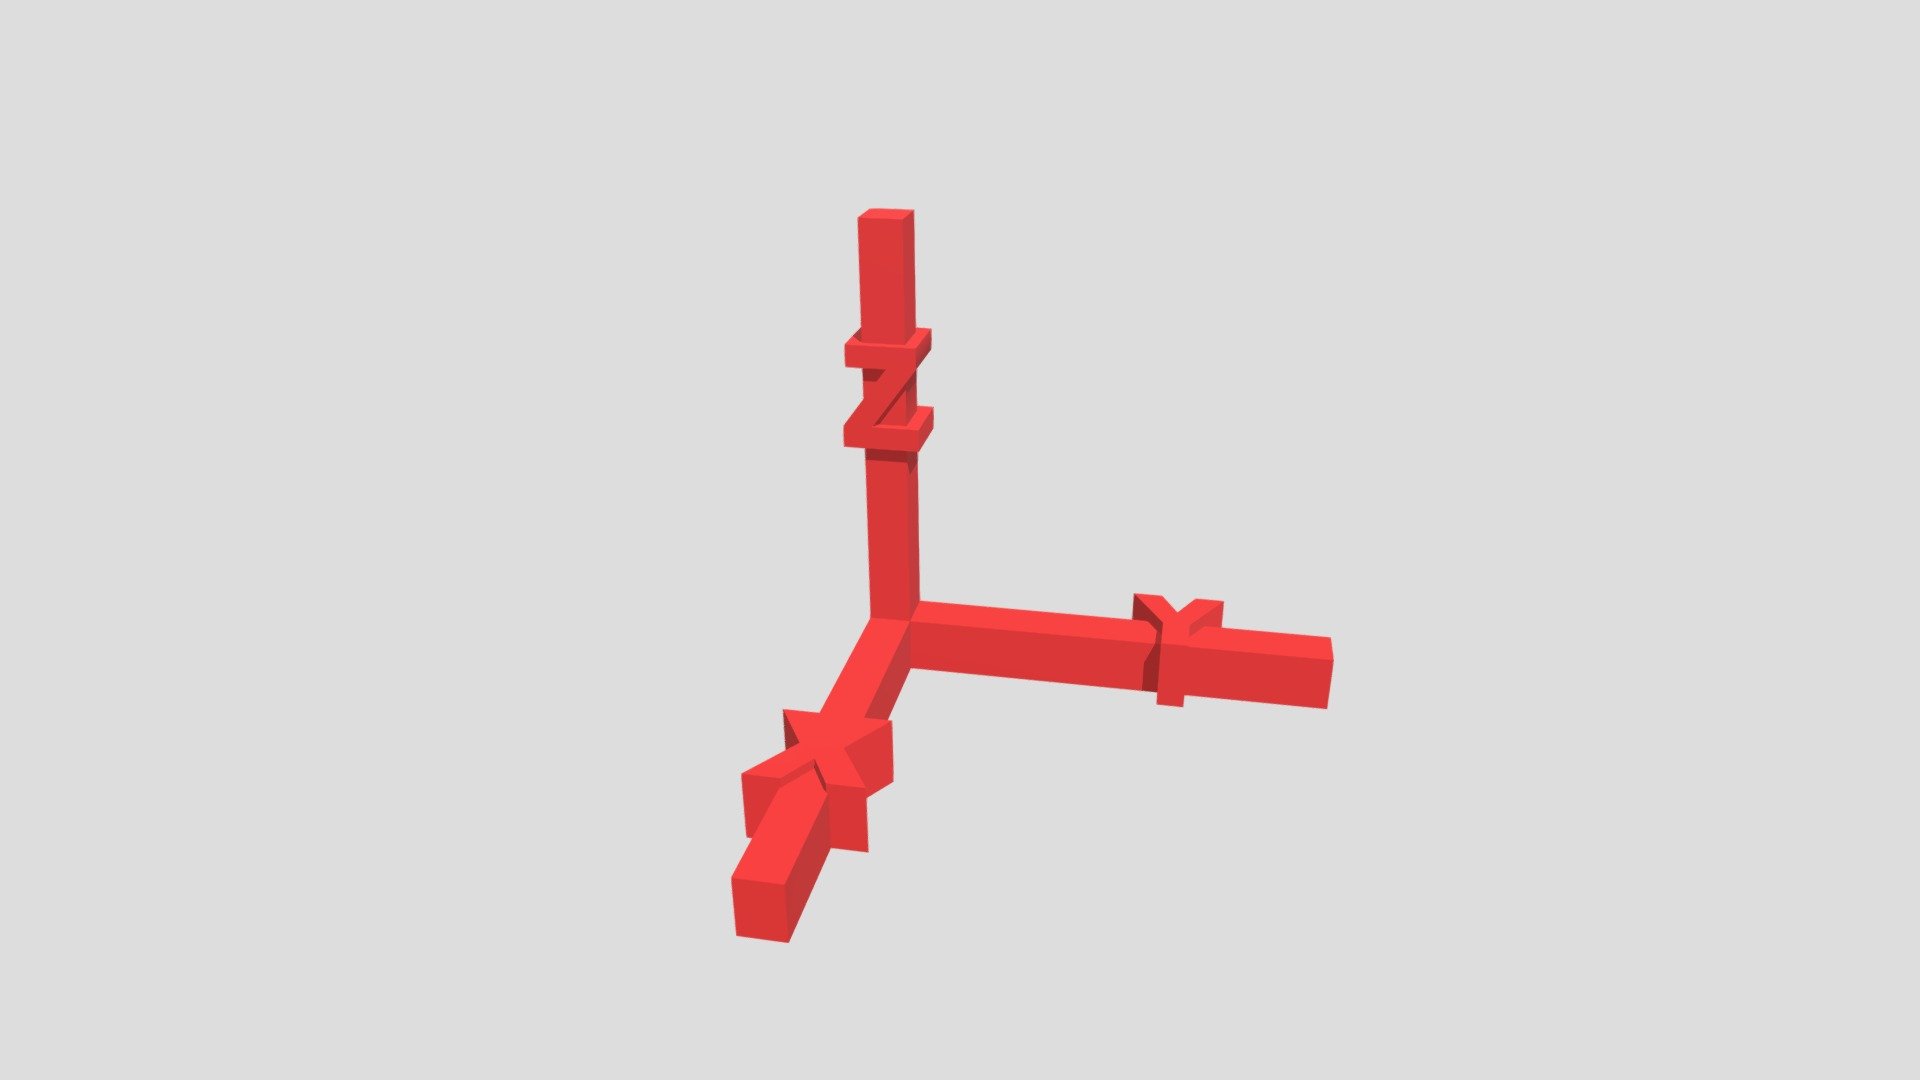 This is a simple 3D model of an X Y Z model that can be used in lesson when teaching children/teenages about 3D printing. This helps demonstrate the concept of how a 3D printer moves in relation to X Y and Z co-ordinates that are created from a G code of an STL file. Which in turn are created from a 3D model that is created in a 3D workspace using X Y and Z co-ordinates. 

This is an example of the free STL files that come with the lesson resources from learnbylayers All the lessons come pre planned and include teaching tutorials, lesson tasks, homeworks, answersheets, CAD video tutorials and assessments. 

If you are looking to start teaching 3D printing with your students, then learnbylayers will help you and is trusted by hundreds of schools in over 30 countries. For more information about learnbylayers from teachers visit the [testimonials] link here. (https://www.learnbylayers.com/tag/testimonials/)

Also ensure that you download the free lesson from the homepage 3d model